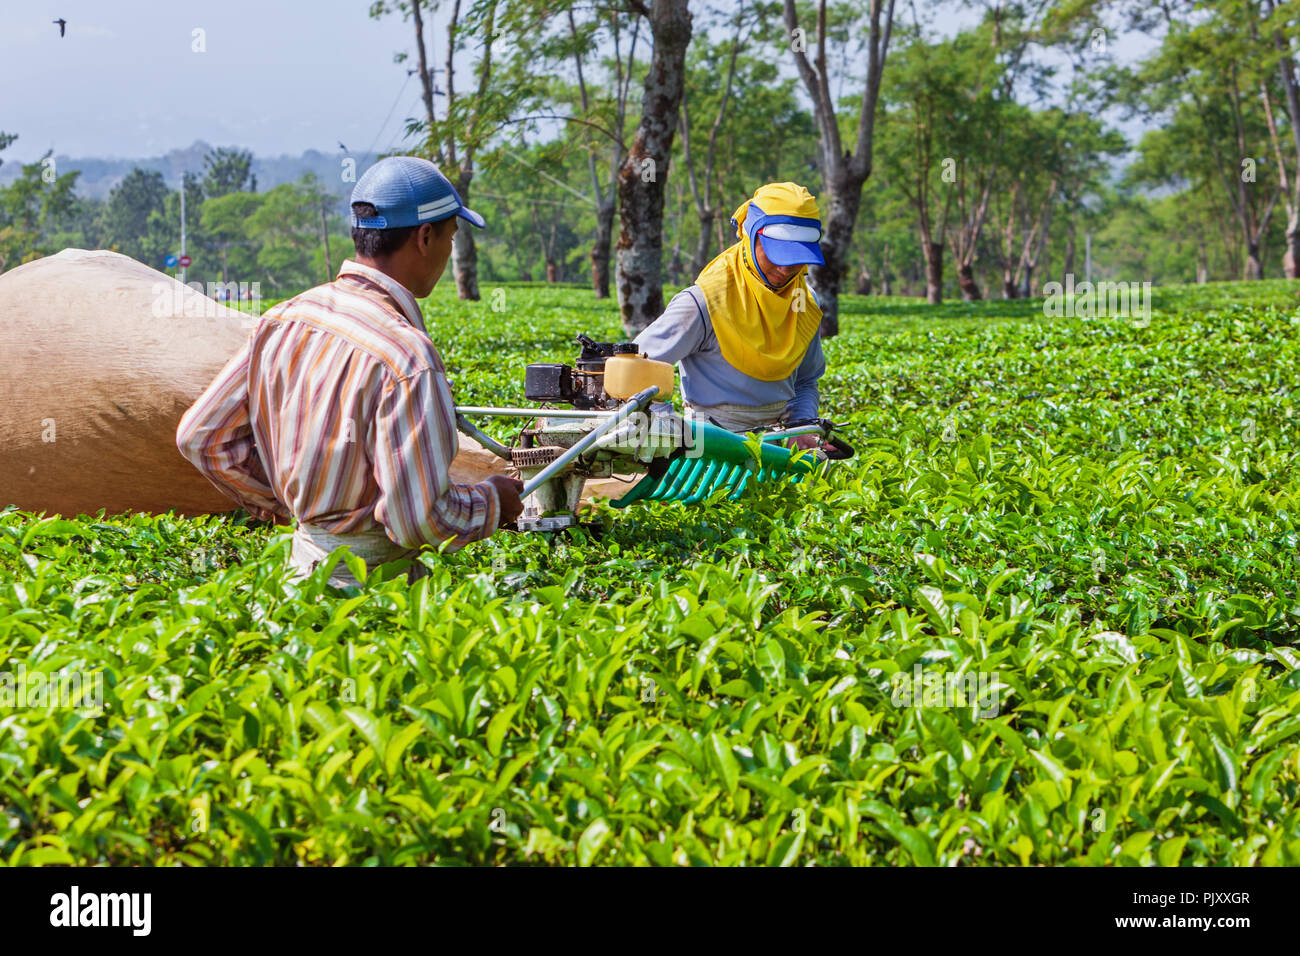 Lawang, Indonesia - July 16, 2018: Indonesian men work hard at highland tea plantation. Farmers picking leaves from green shrubs row. Stock Photo